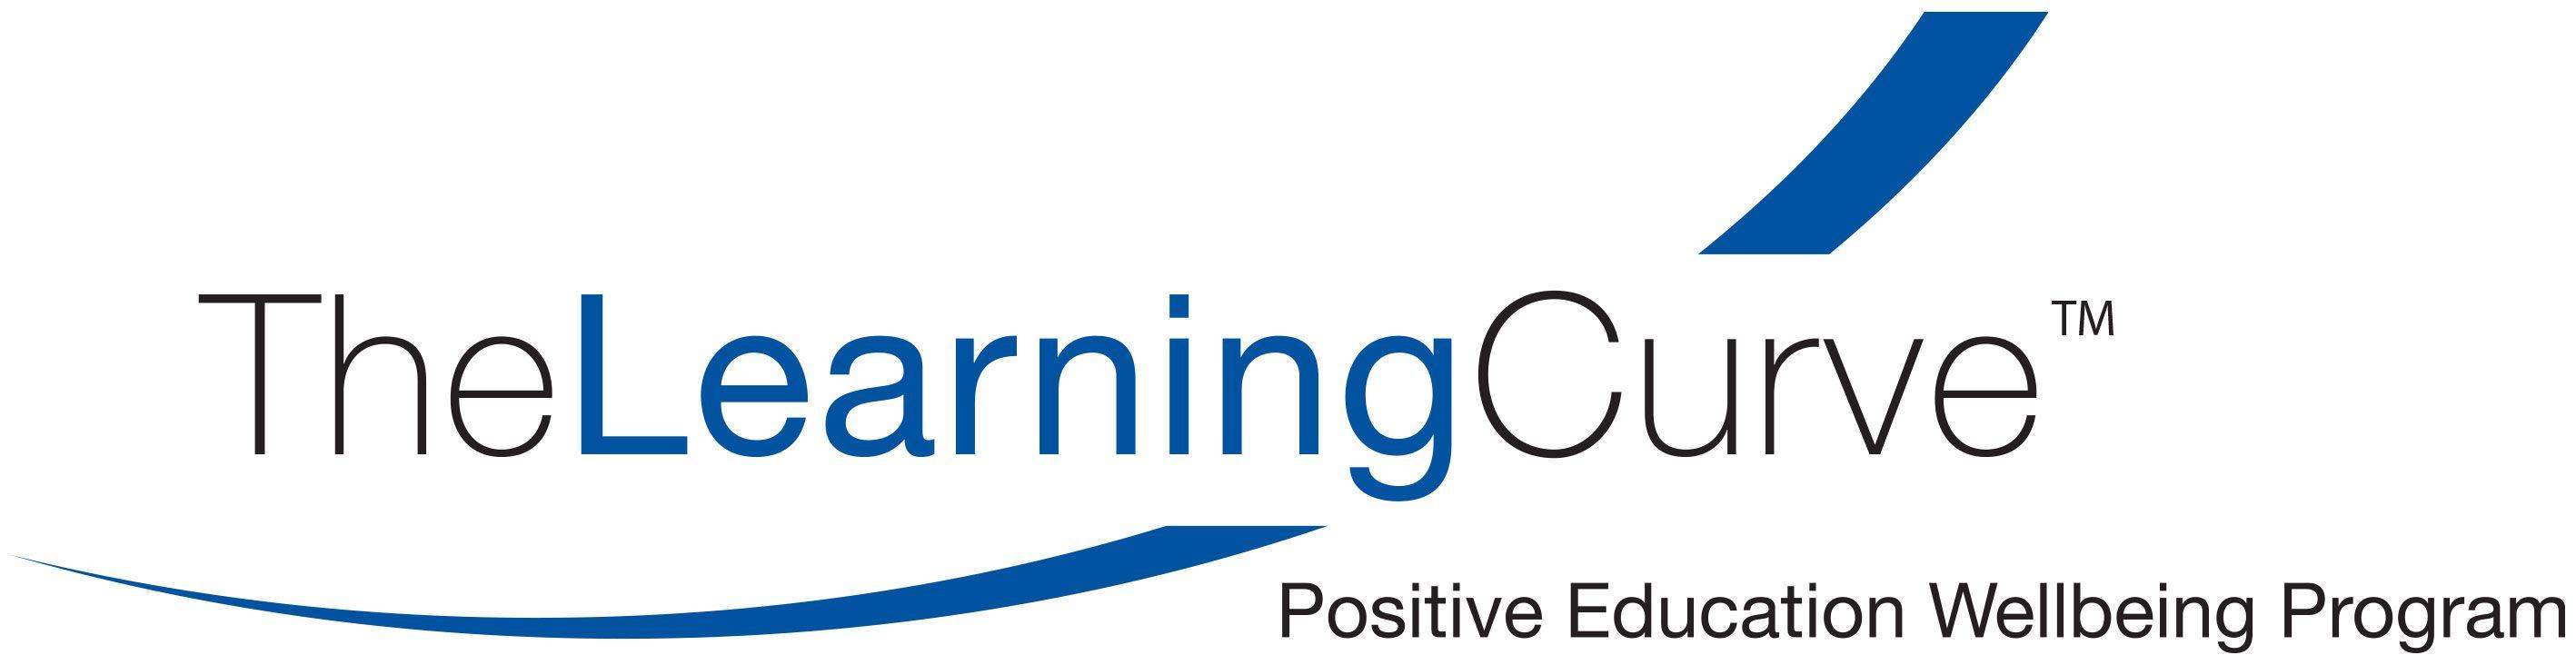 Learning Curve Logo - The Learning Curve - Wellbeing Education